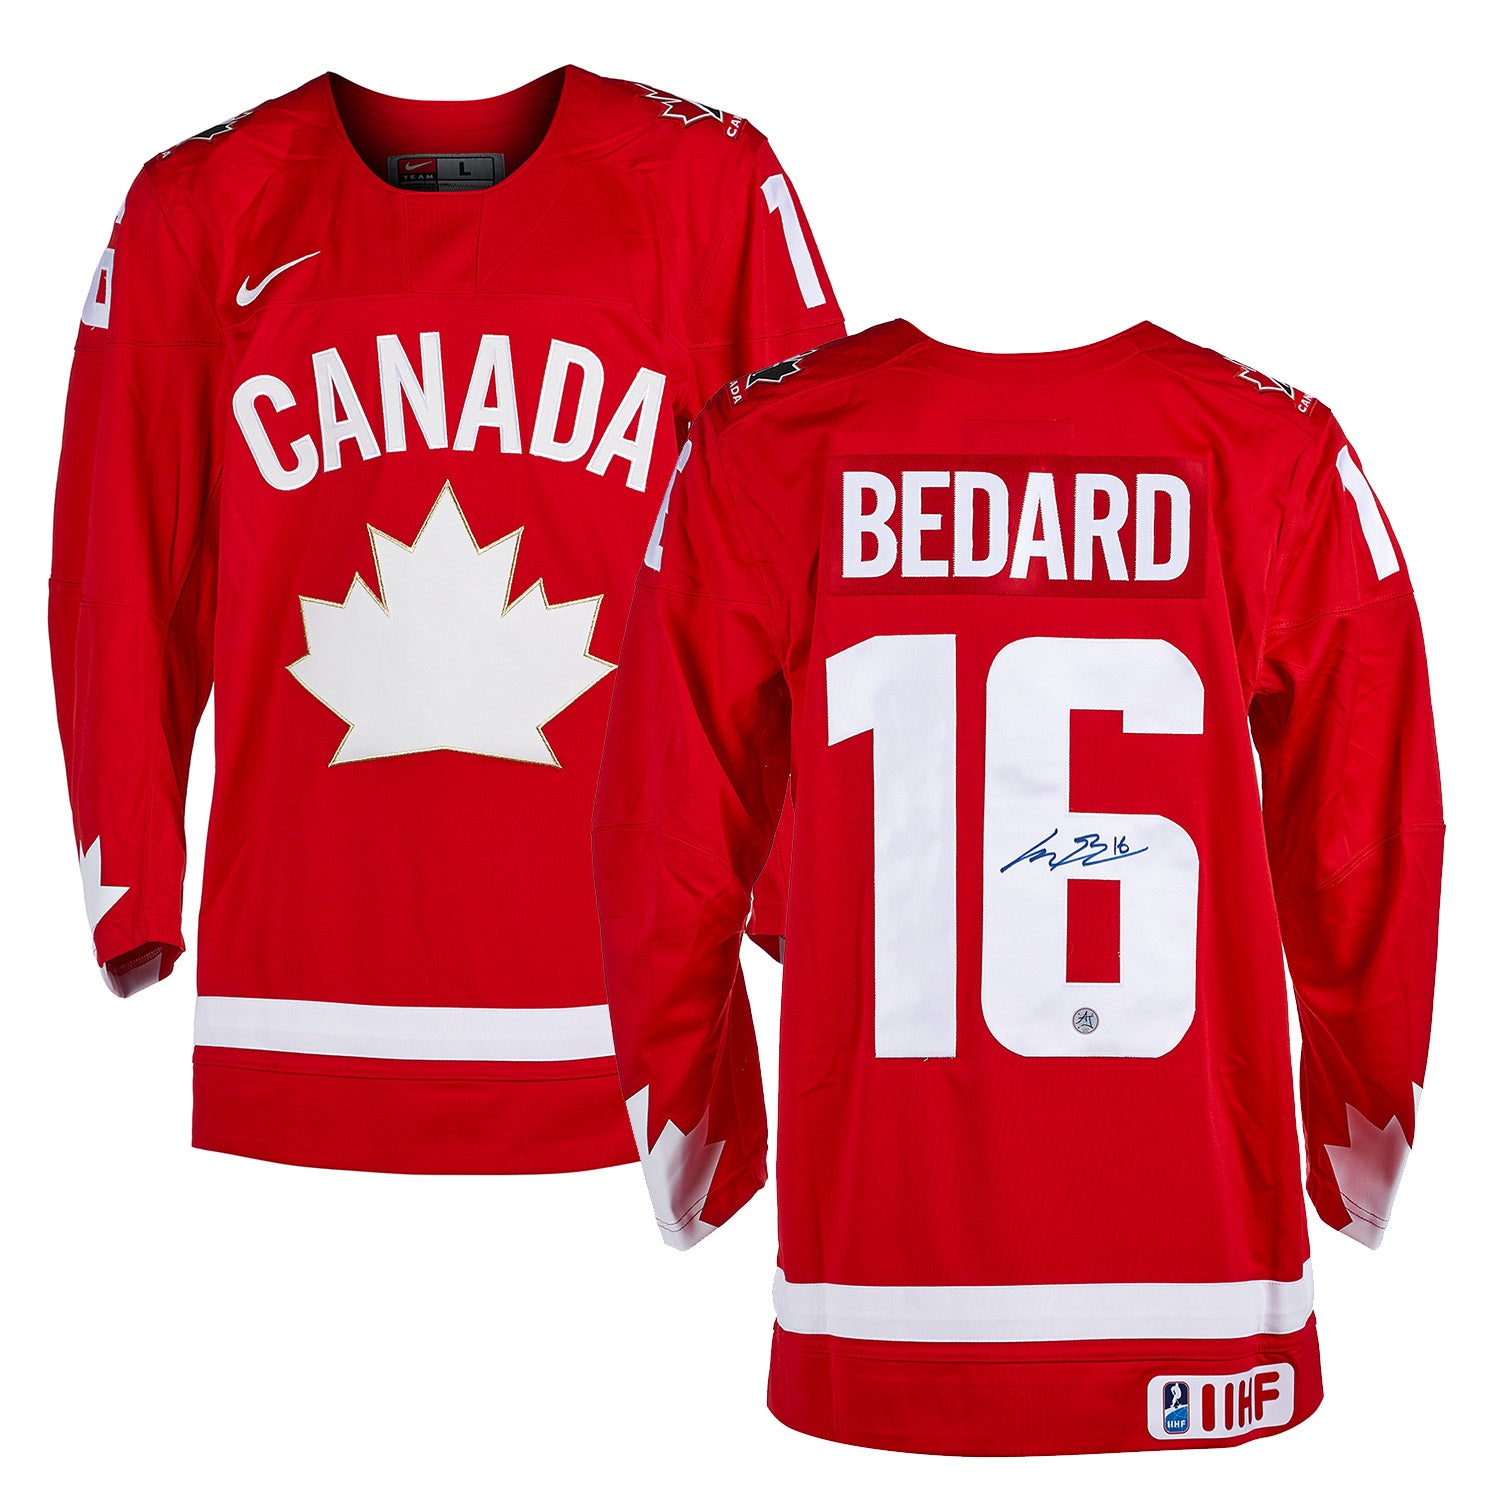 Connor Bedard Signed Team Canada Red Alt Heritage Nike Jersey